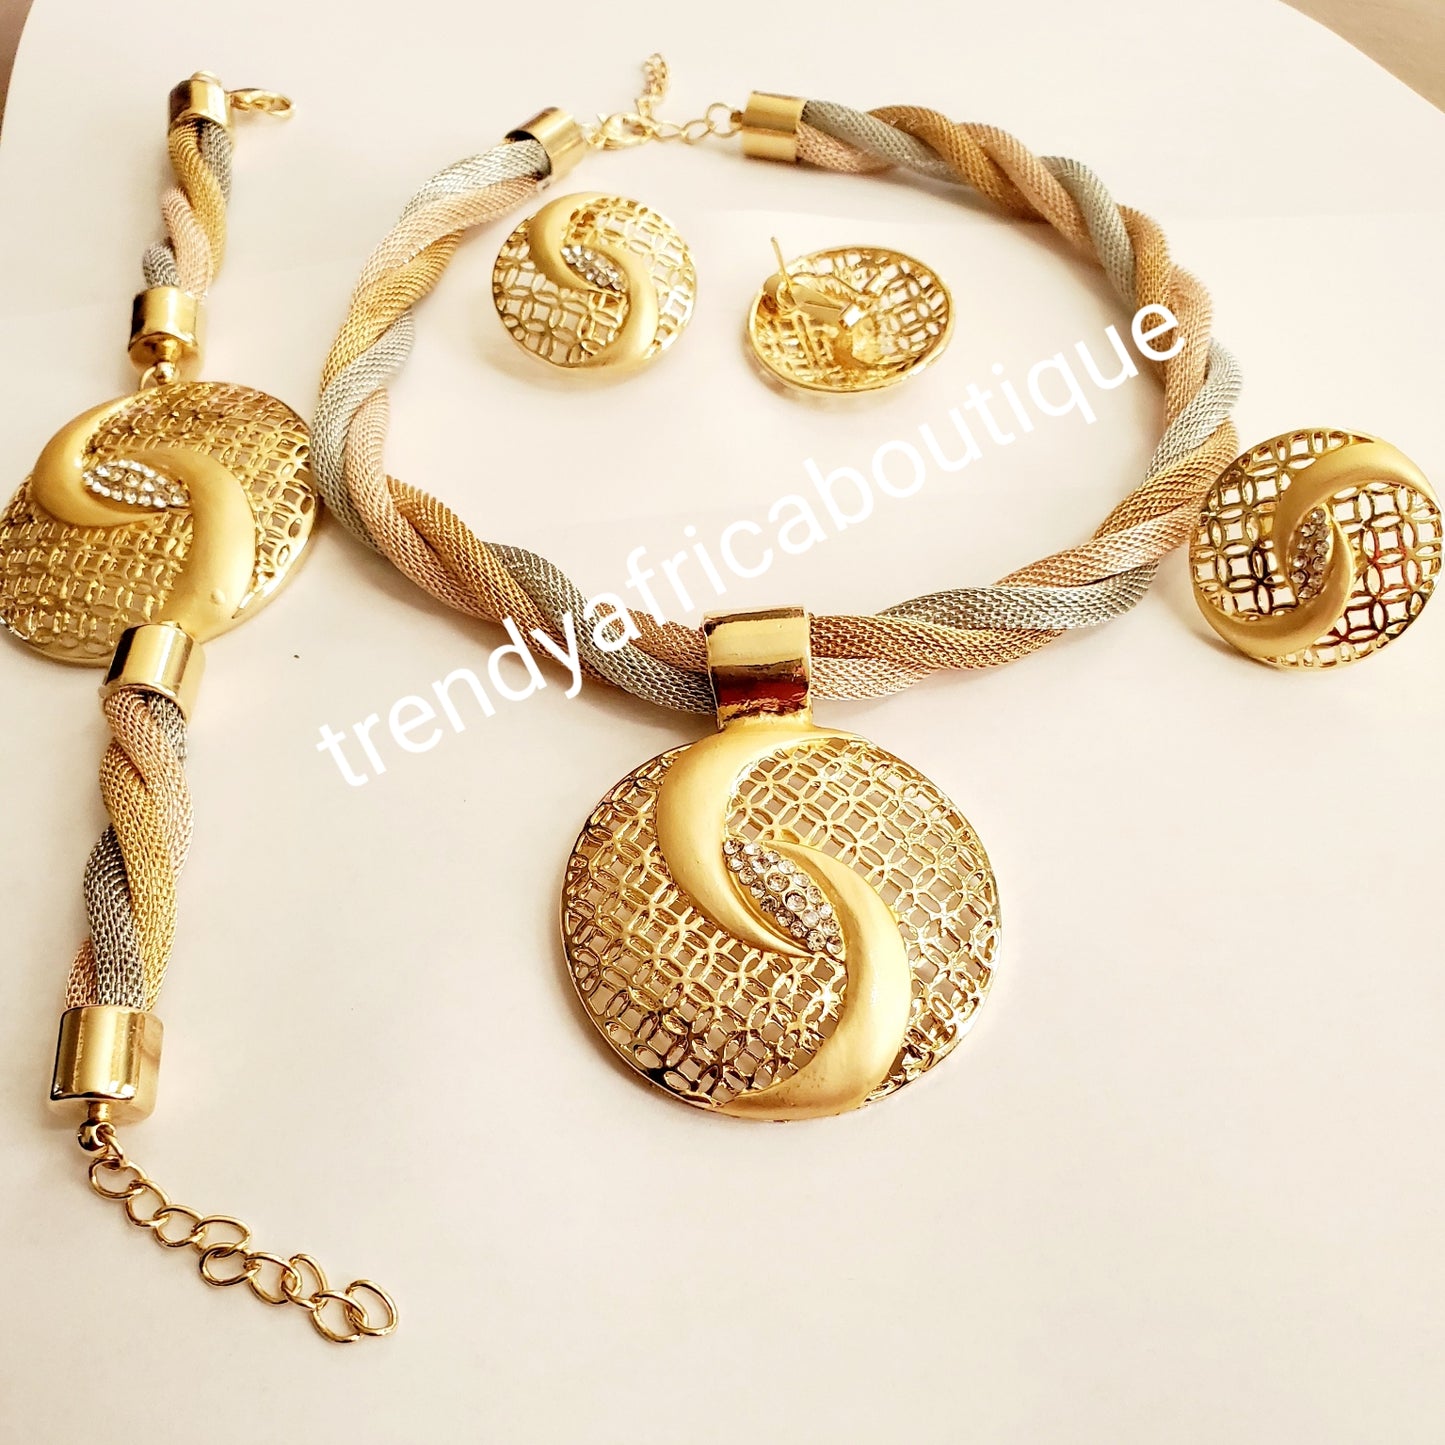 High quality 3 tone18k plated 4pc necklace  set.  beautiful hypoallergenic choker with matching earring, adjustable ring & a bracelet. Sold as set, price is for the set. Classic for casual wear.